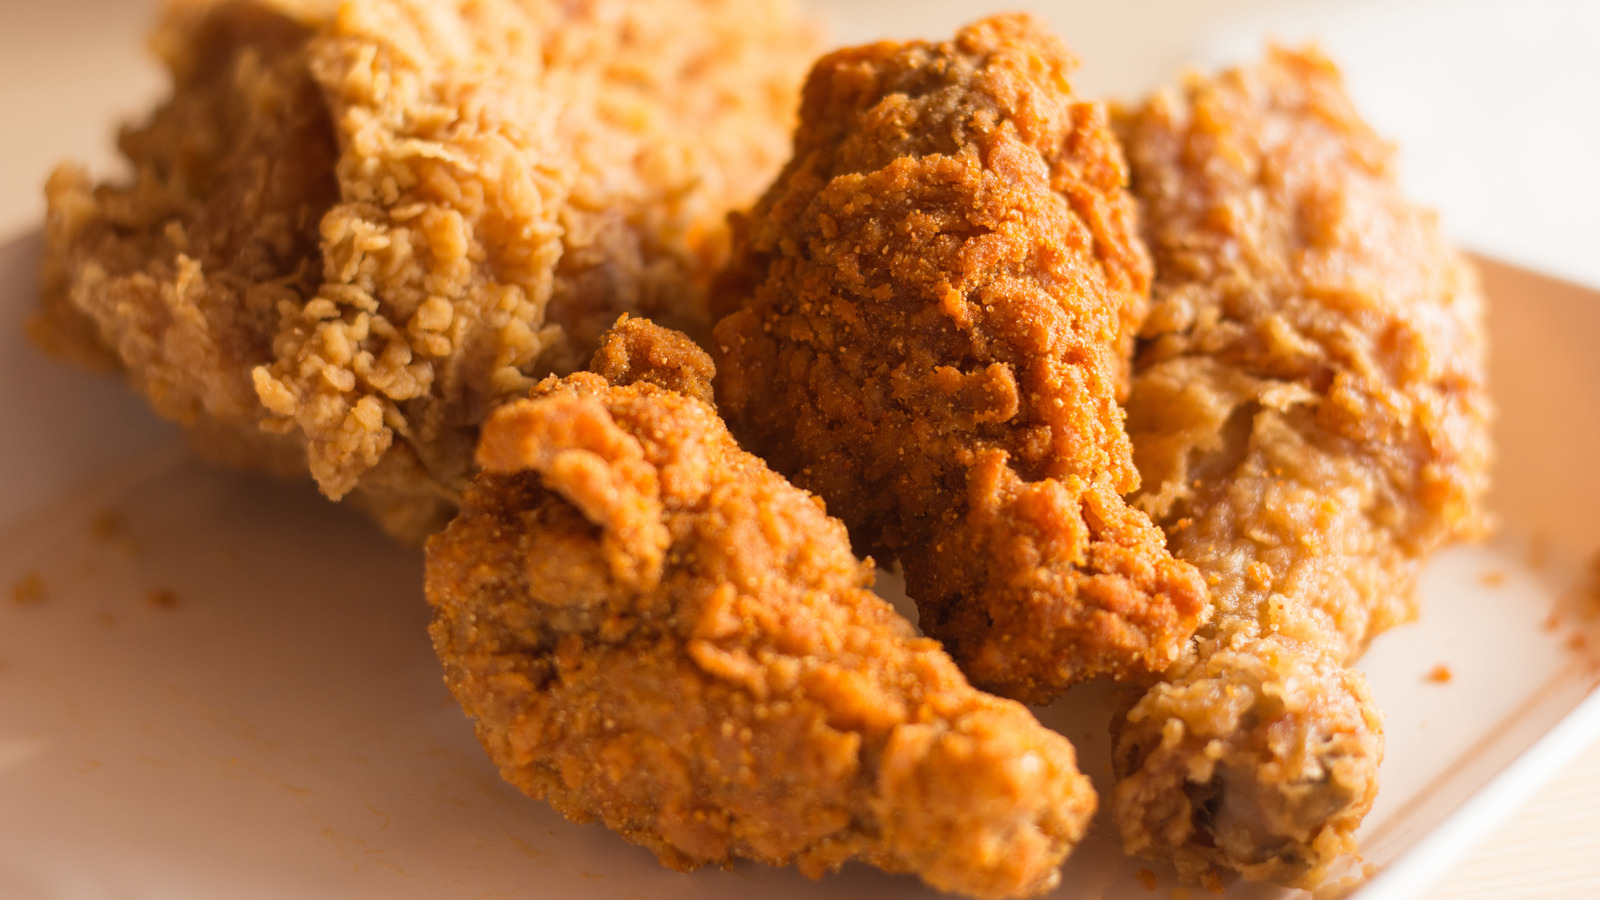 You Should Be Adding Vodka To Your Fried Chicken Recipe. Here's Why